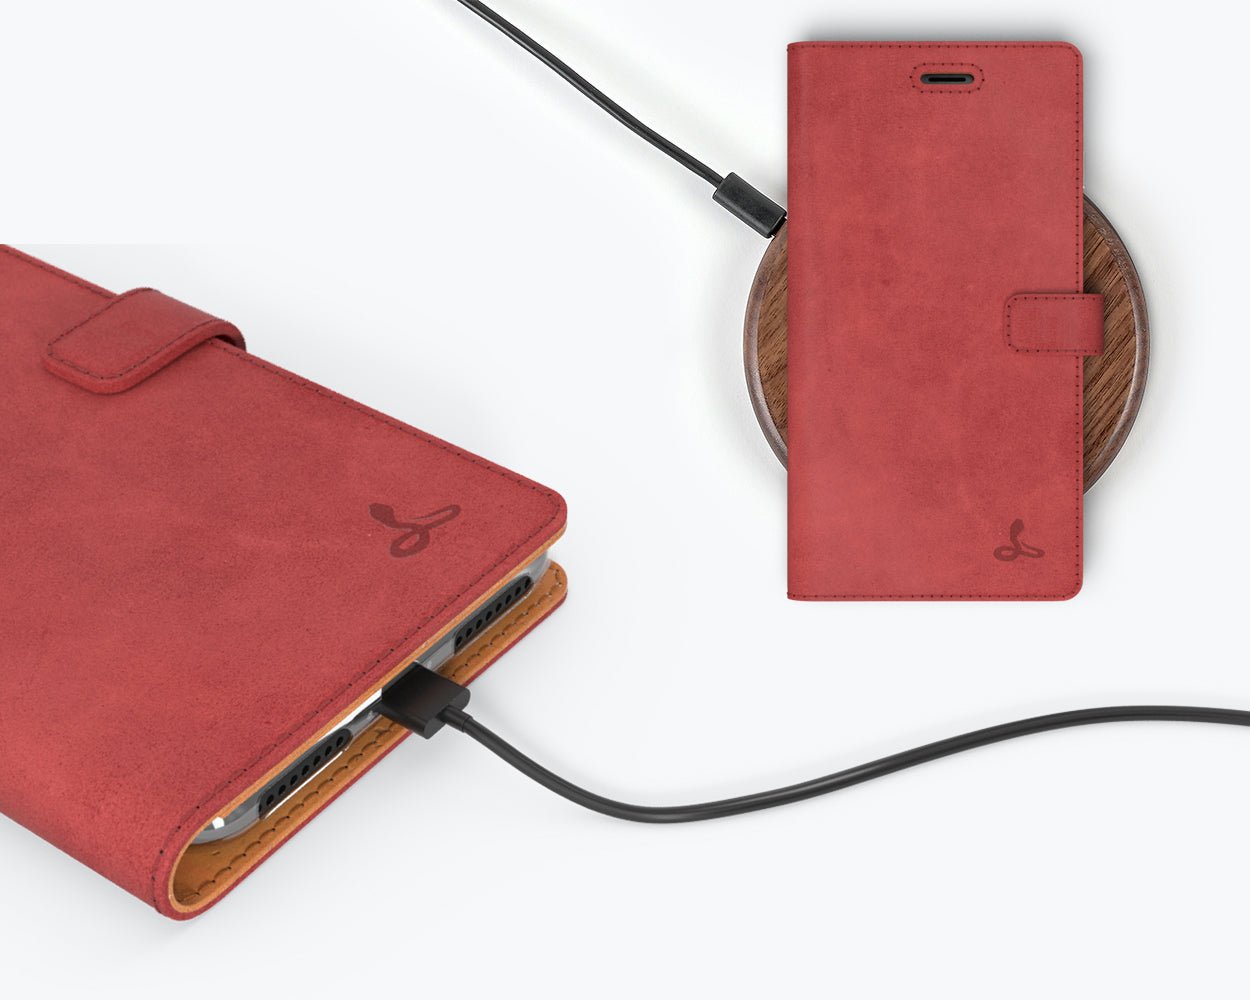 Apple iPhone 7 Plus - Vintage Leather Wallet (Almost Perfect) Red Apple iPhone 7 Plus - Snakehive UK